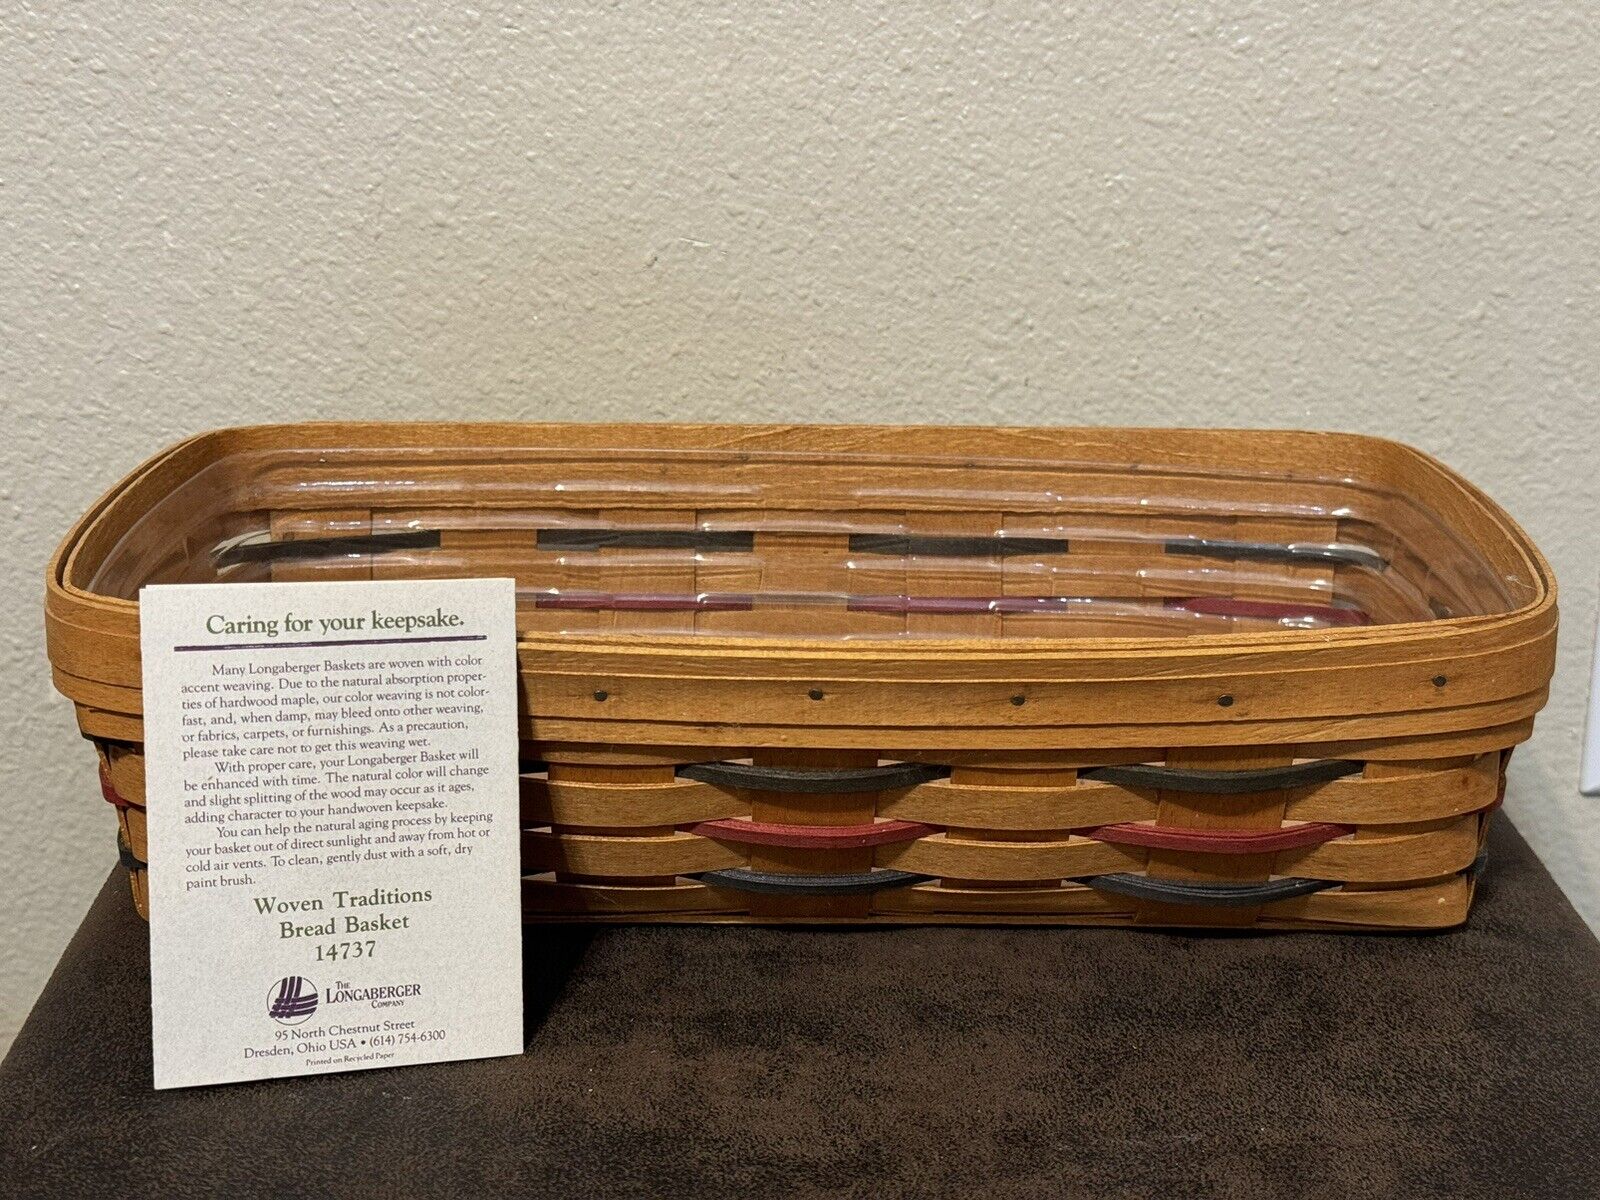 1993 Vintage Longaberger Woven Traditions Bread Basket & Protector #14737